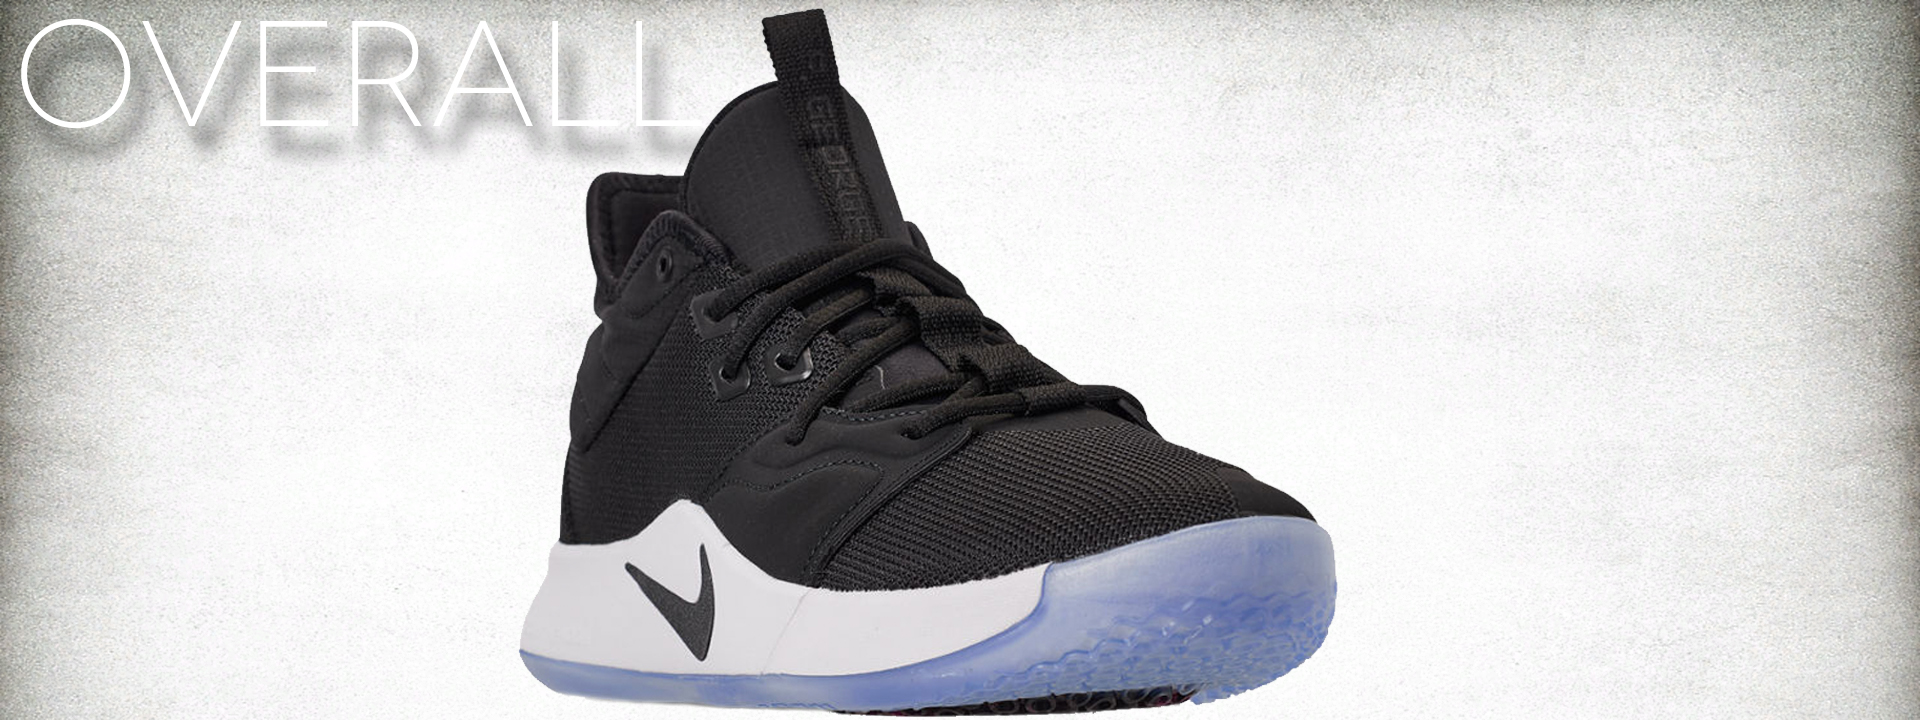 Nike PG 3 Performance Review Overall 1